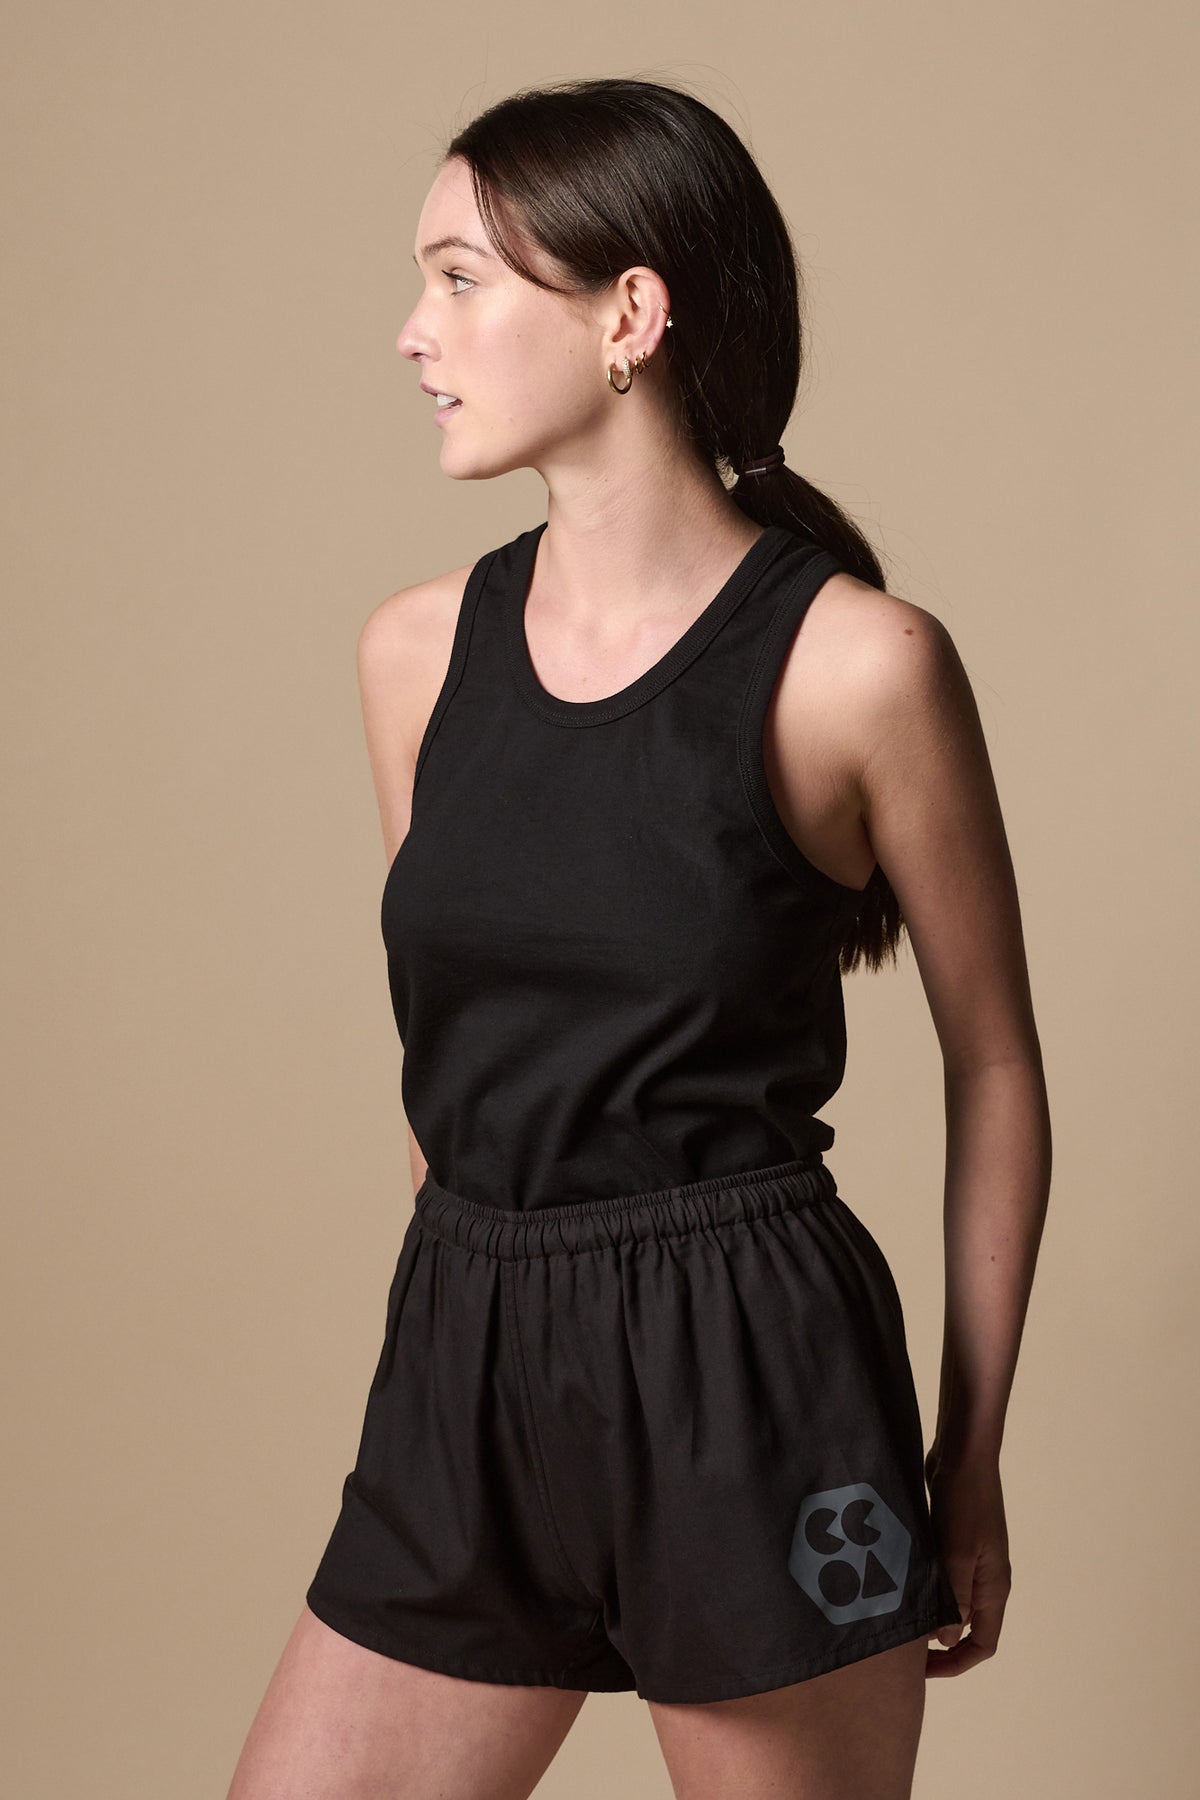 
            Thigh up image of female wearing lightweight sports short plastic free in black with CCOA logo on left leg